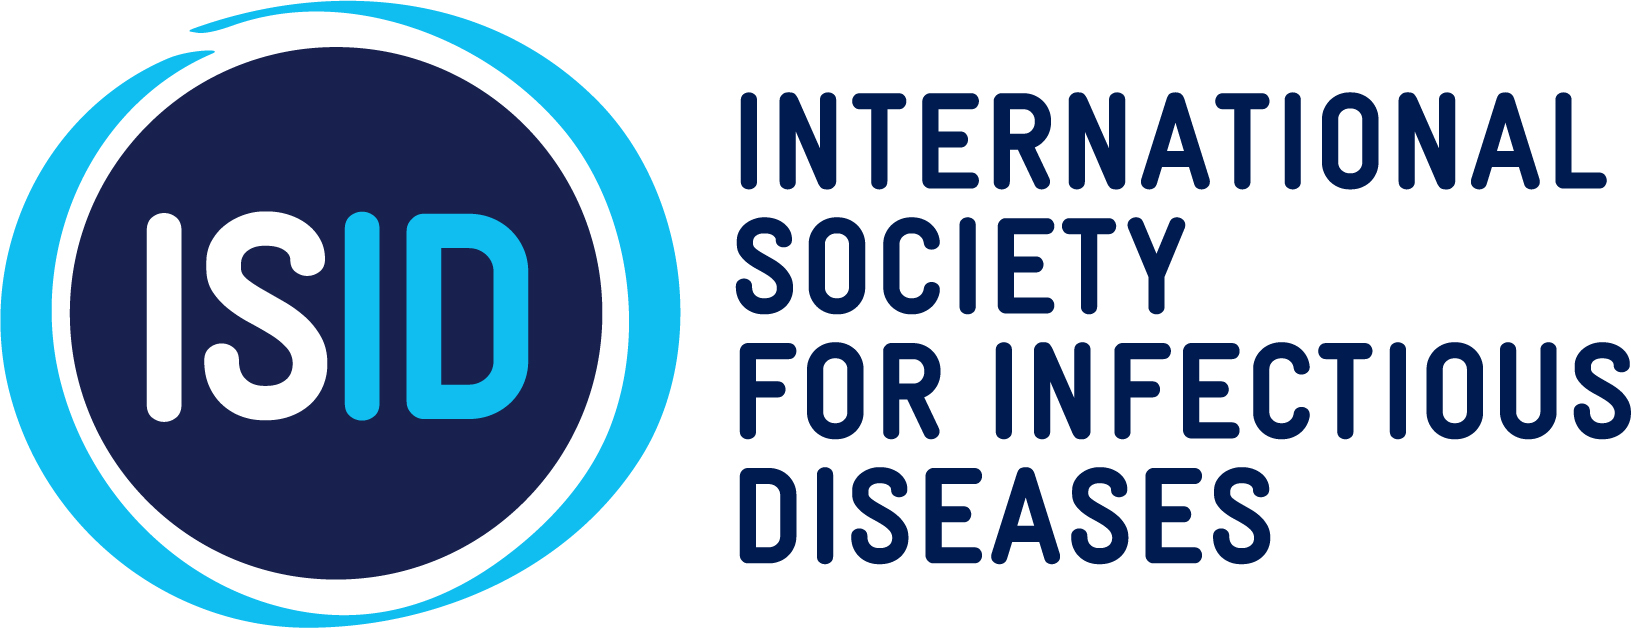 International Society For Infectious Diseases, Inc. logo